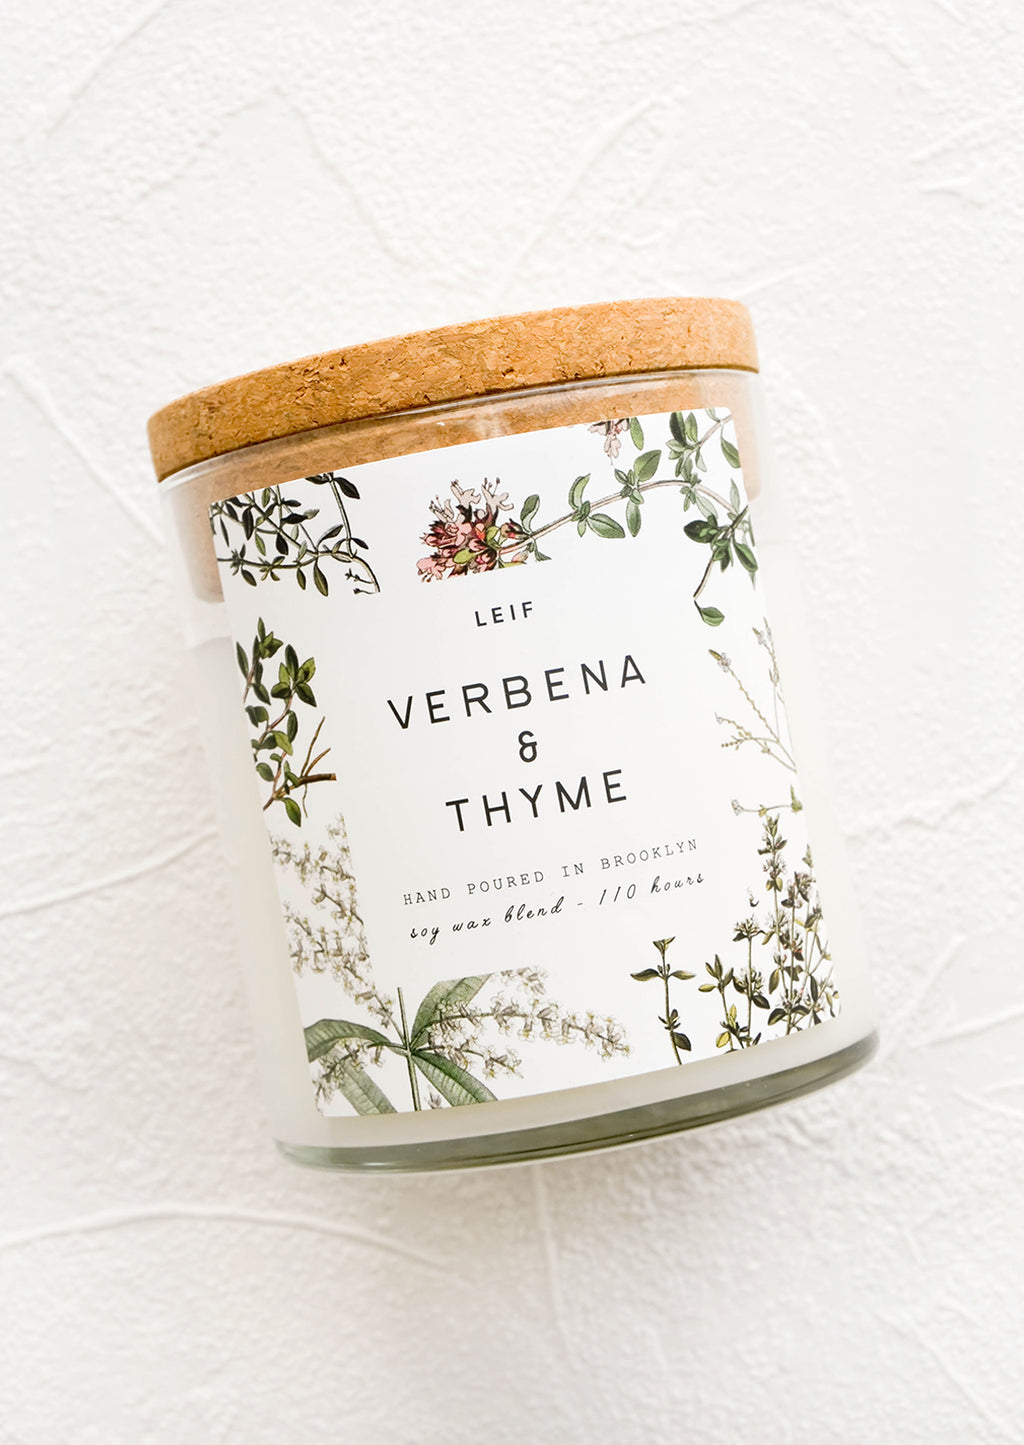 Verbena & Thyme: A glass jar candle in Verbena & Thyme scent with botanical print label.